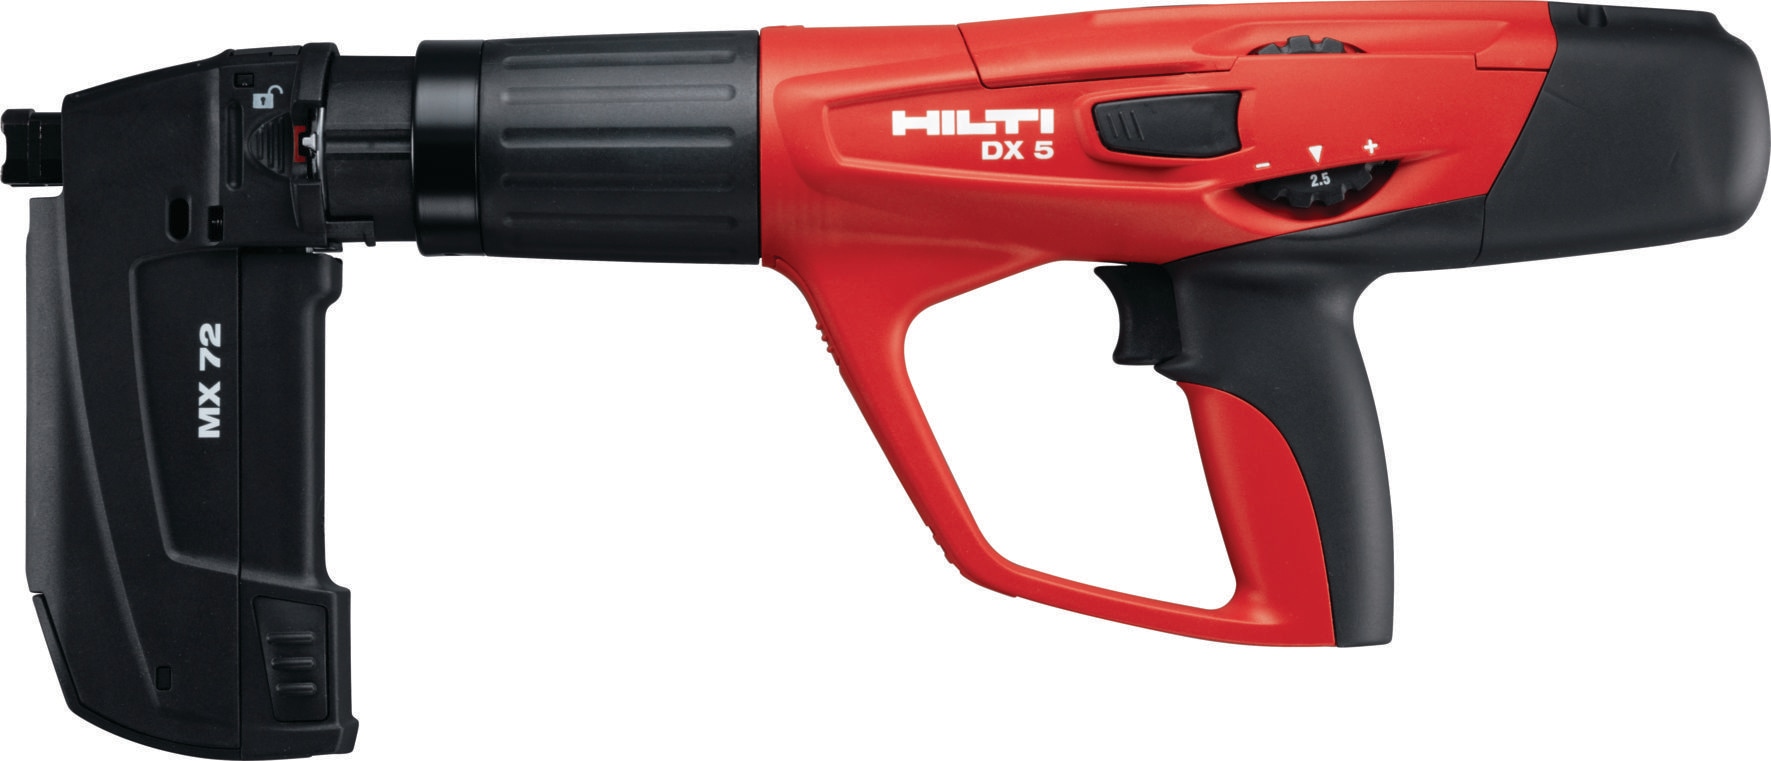 DX 5-MX Powder-actuated tool - Powder actuated direct fastening